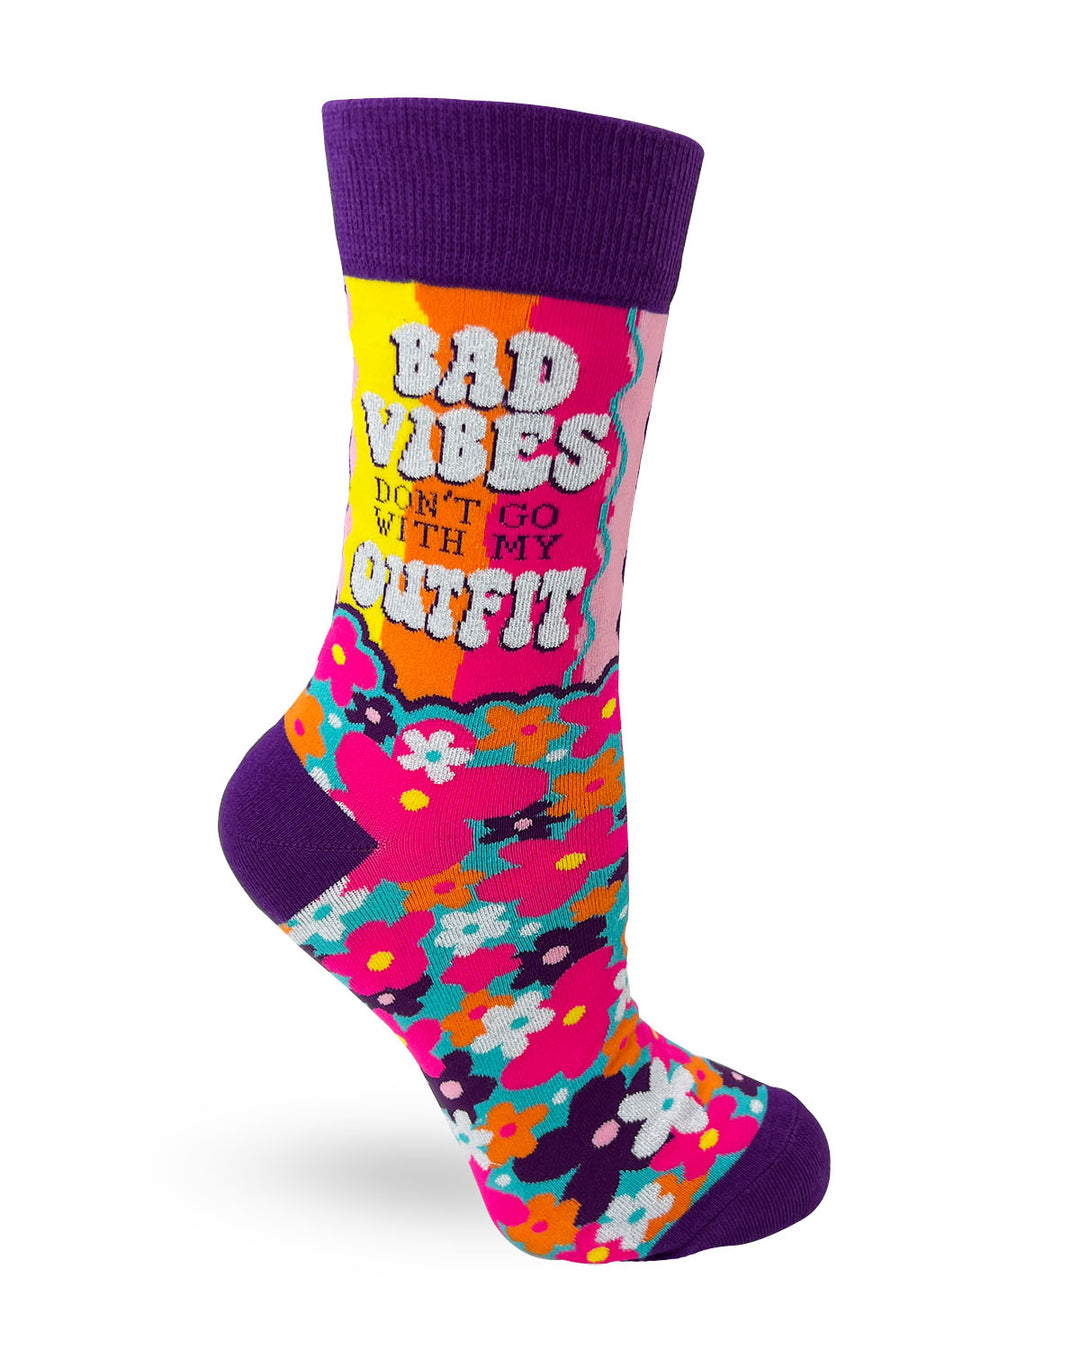 Bad Vibes Don't Go With My Outfit Ladies' Crew Socks